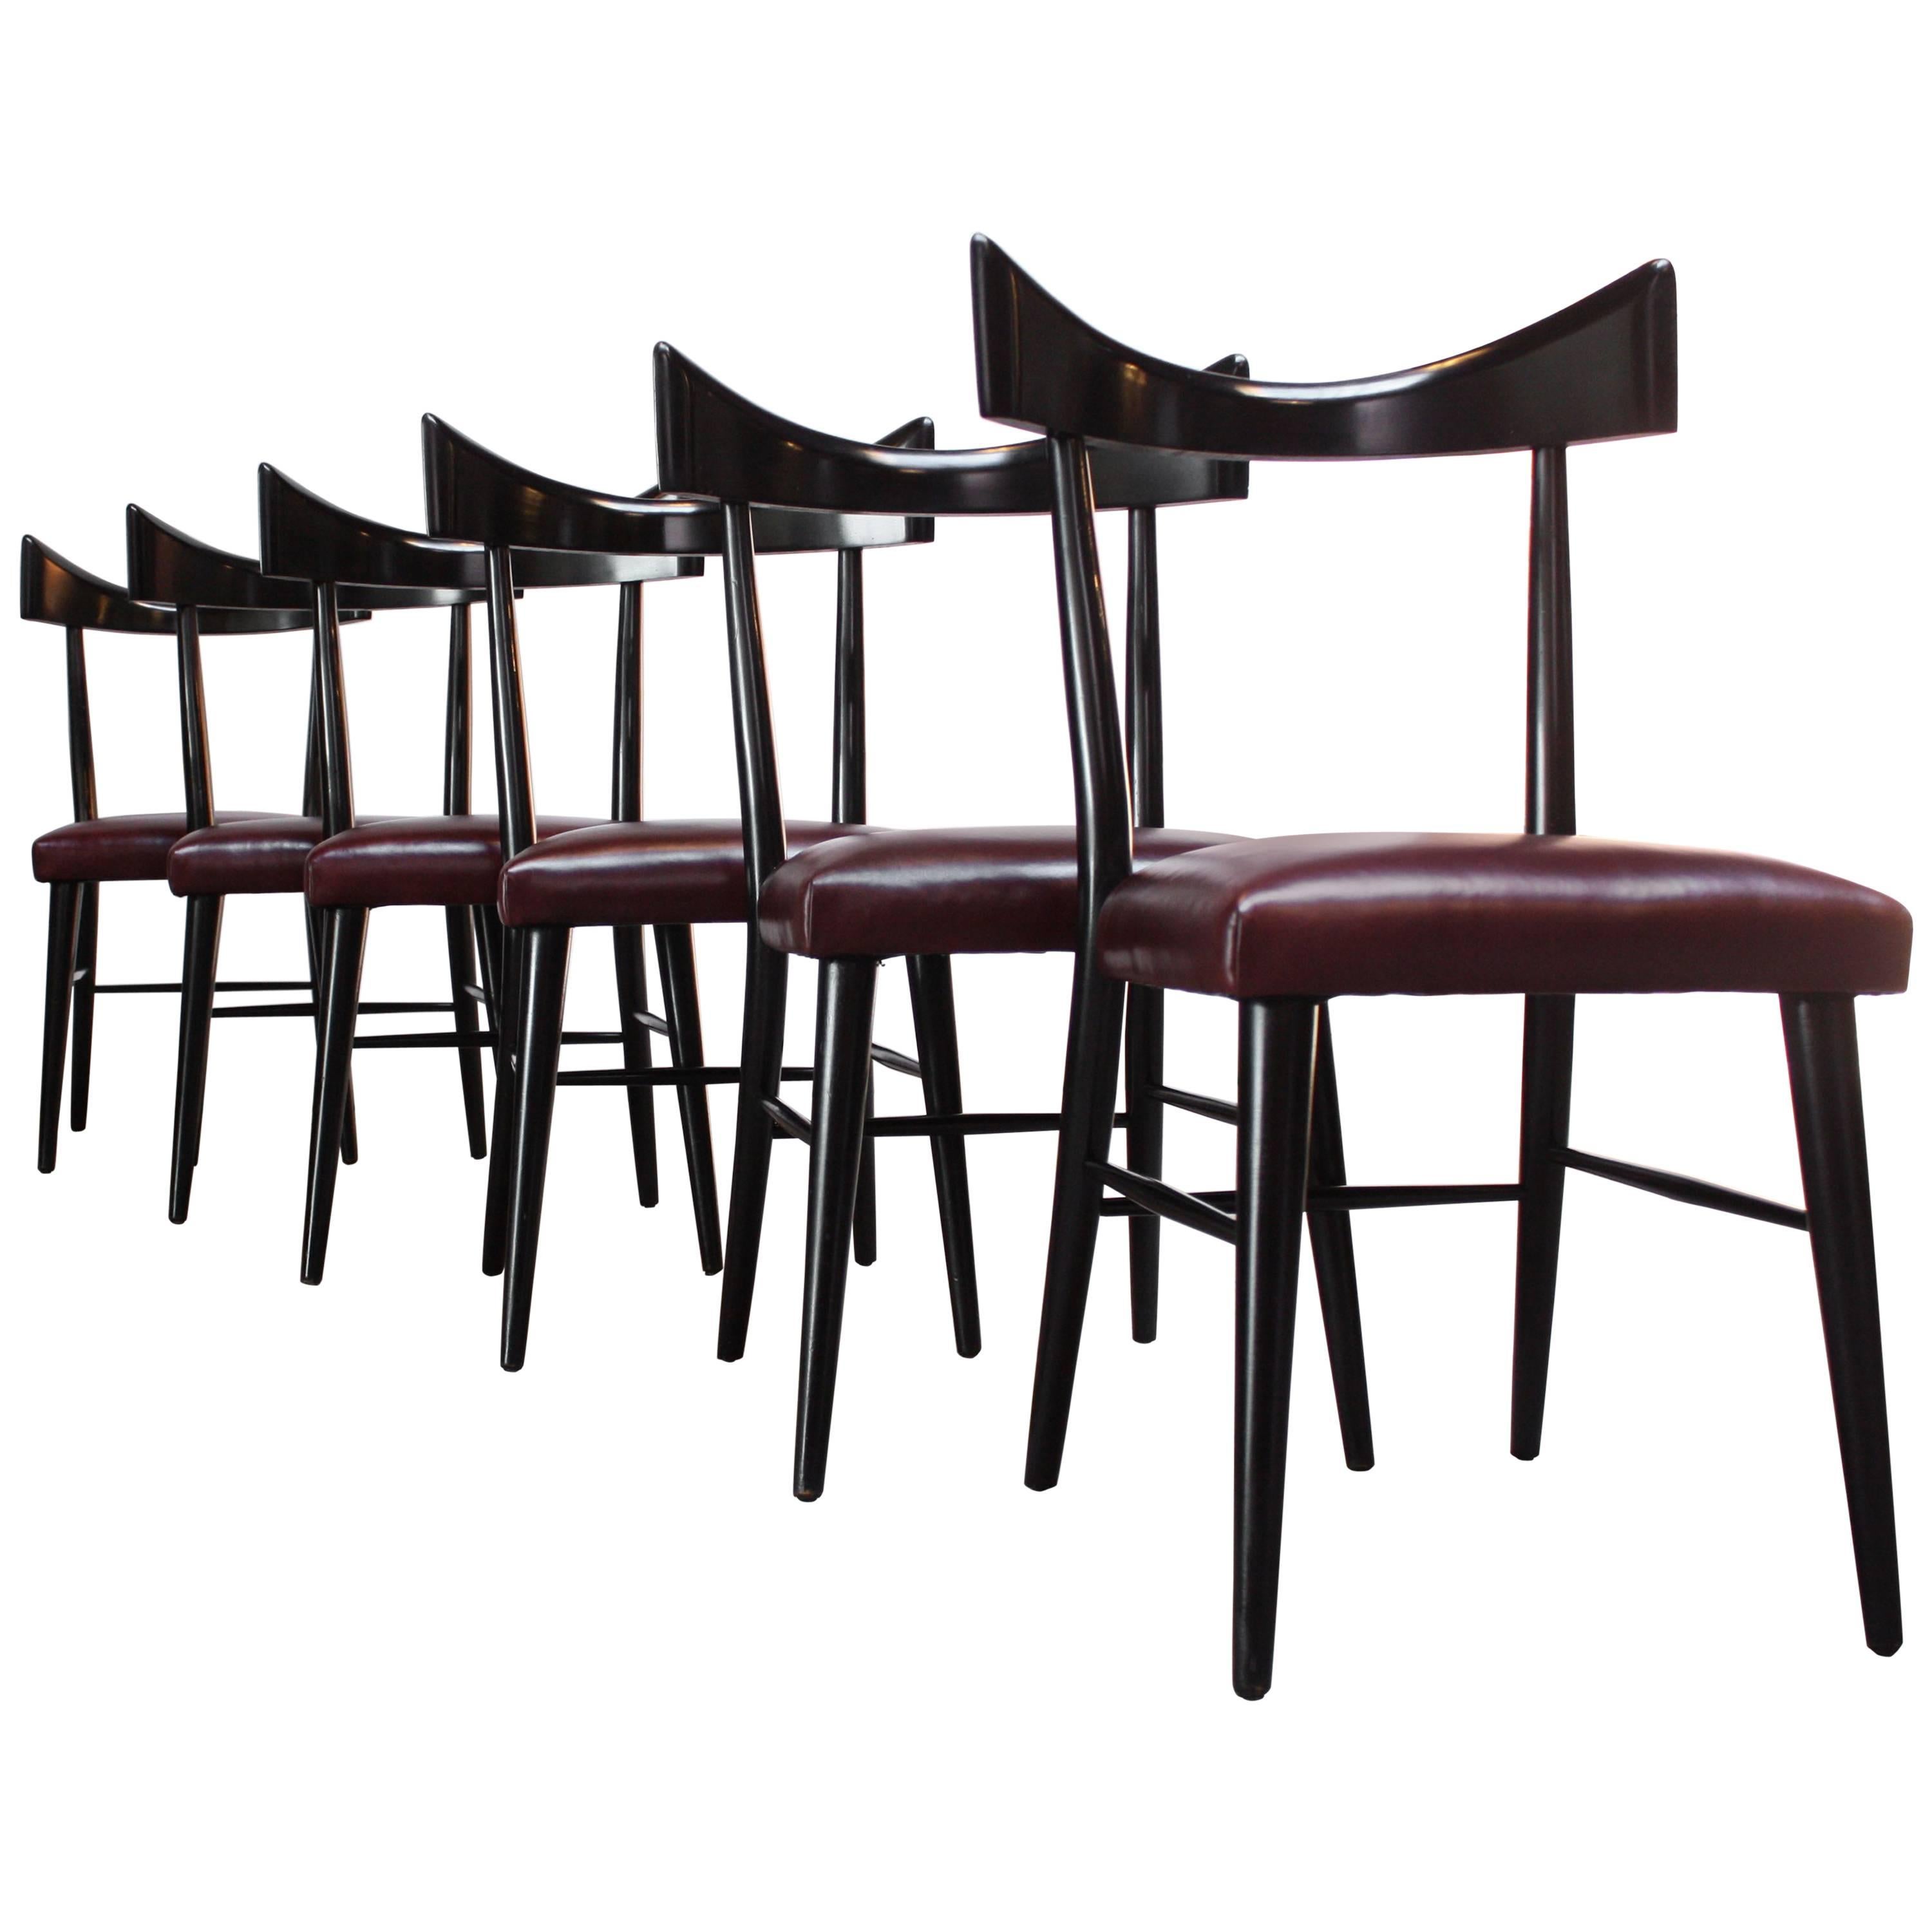 Set of Six Ebonized Curved-Back Dining Chairs by Paul McCobb for Planner Group